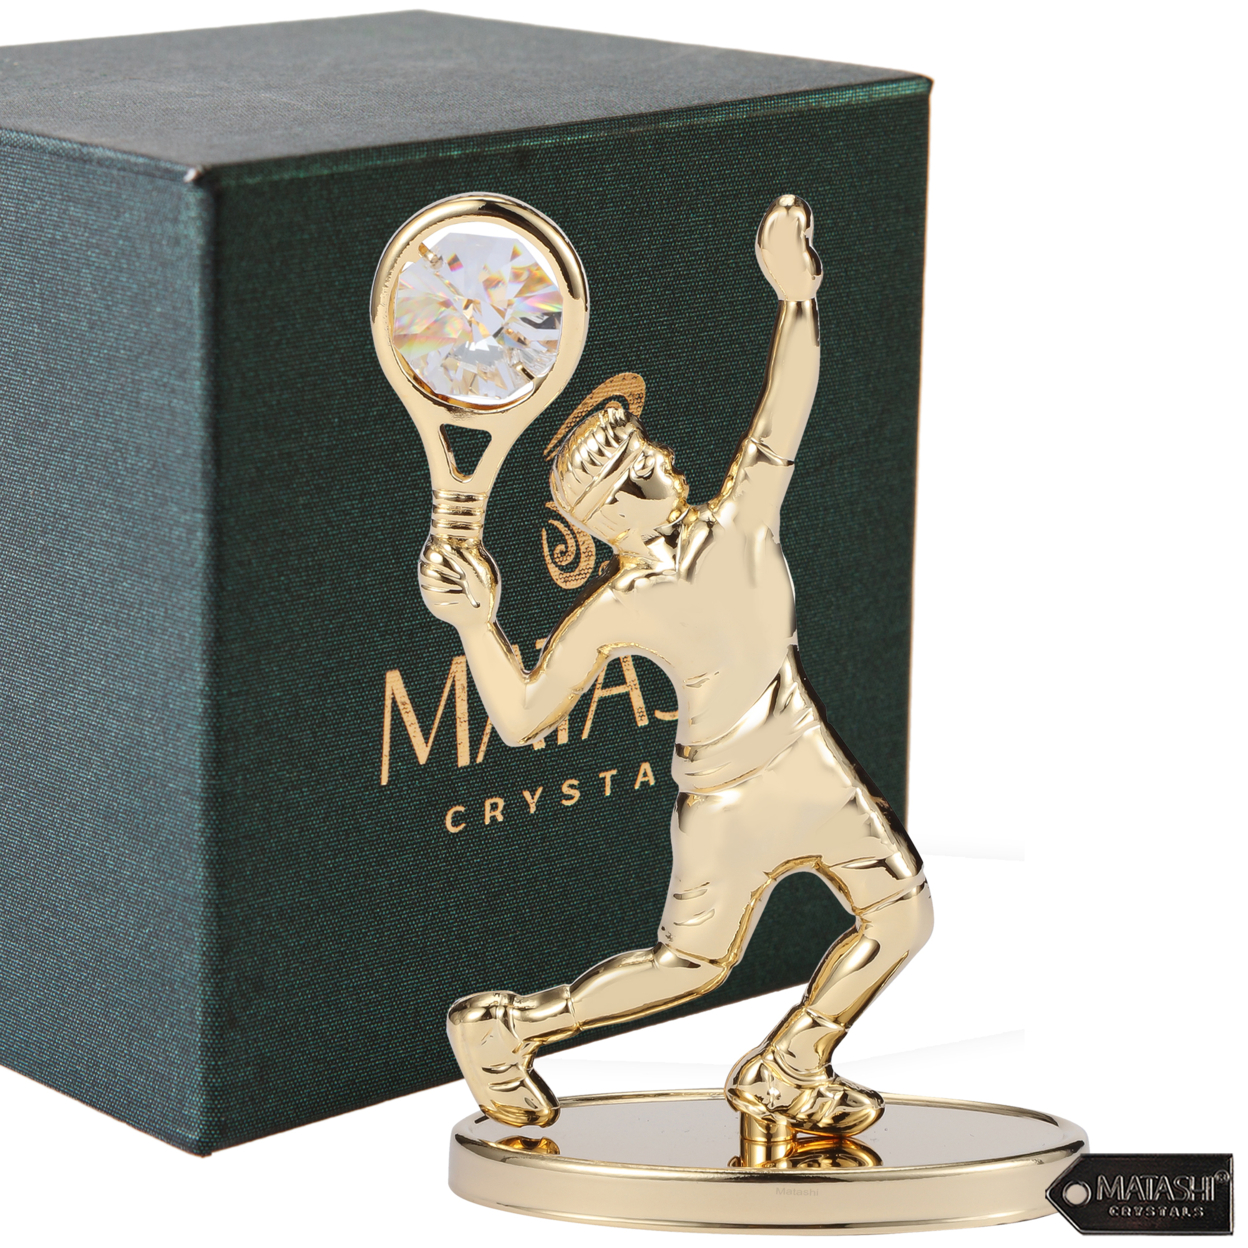 Matashi 24K Gold/Silver Plated Tennis Player Figurine With Crystals, Gift For Sports Fan Birthday Desk Accessories Trophy Boss Gift - Silver